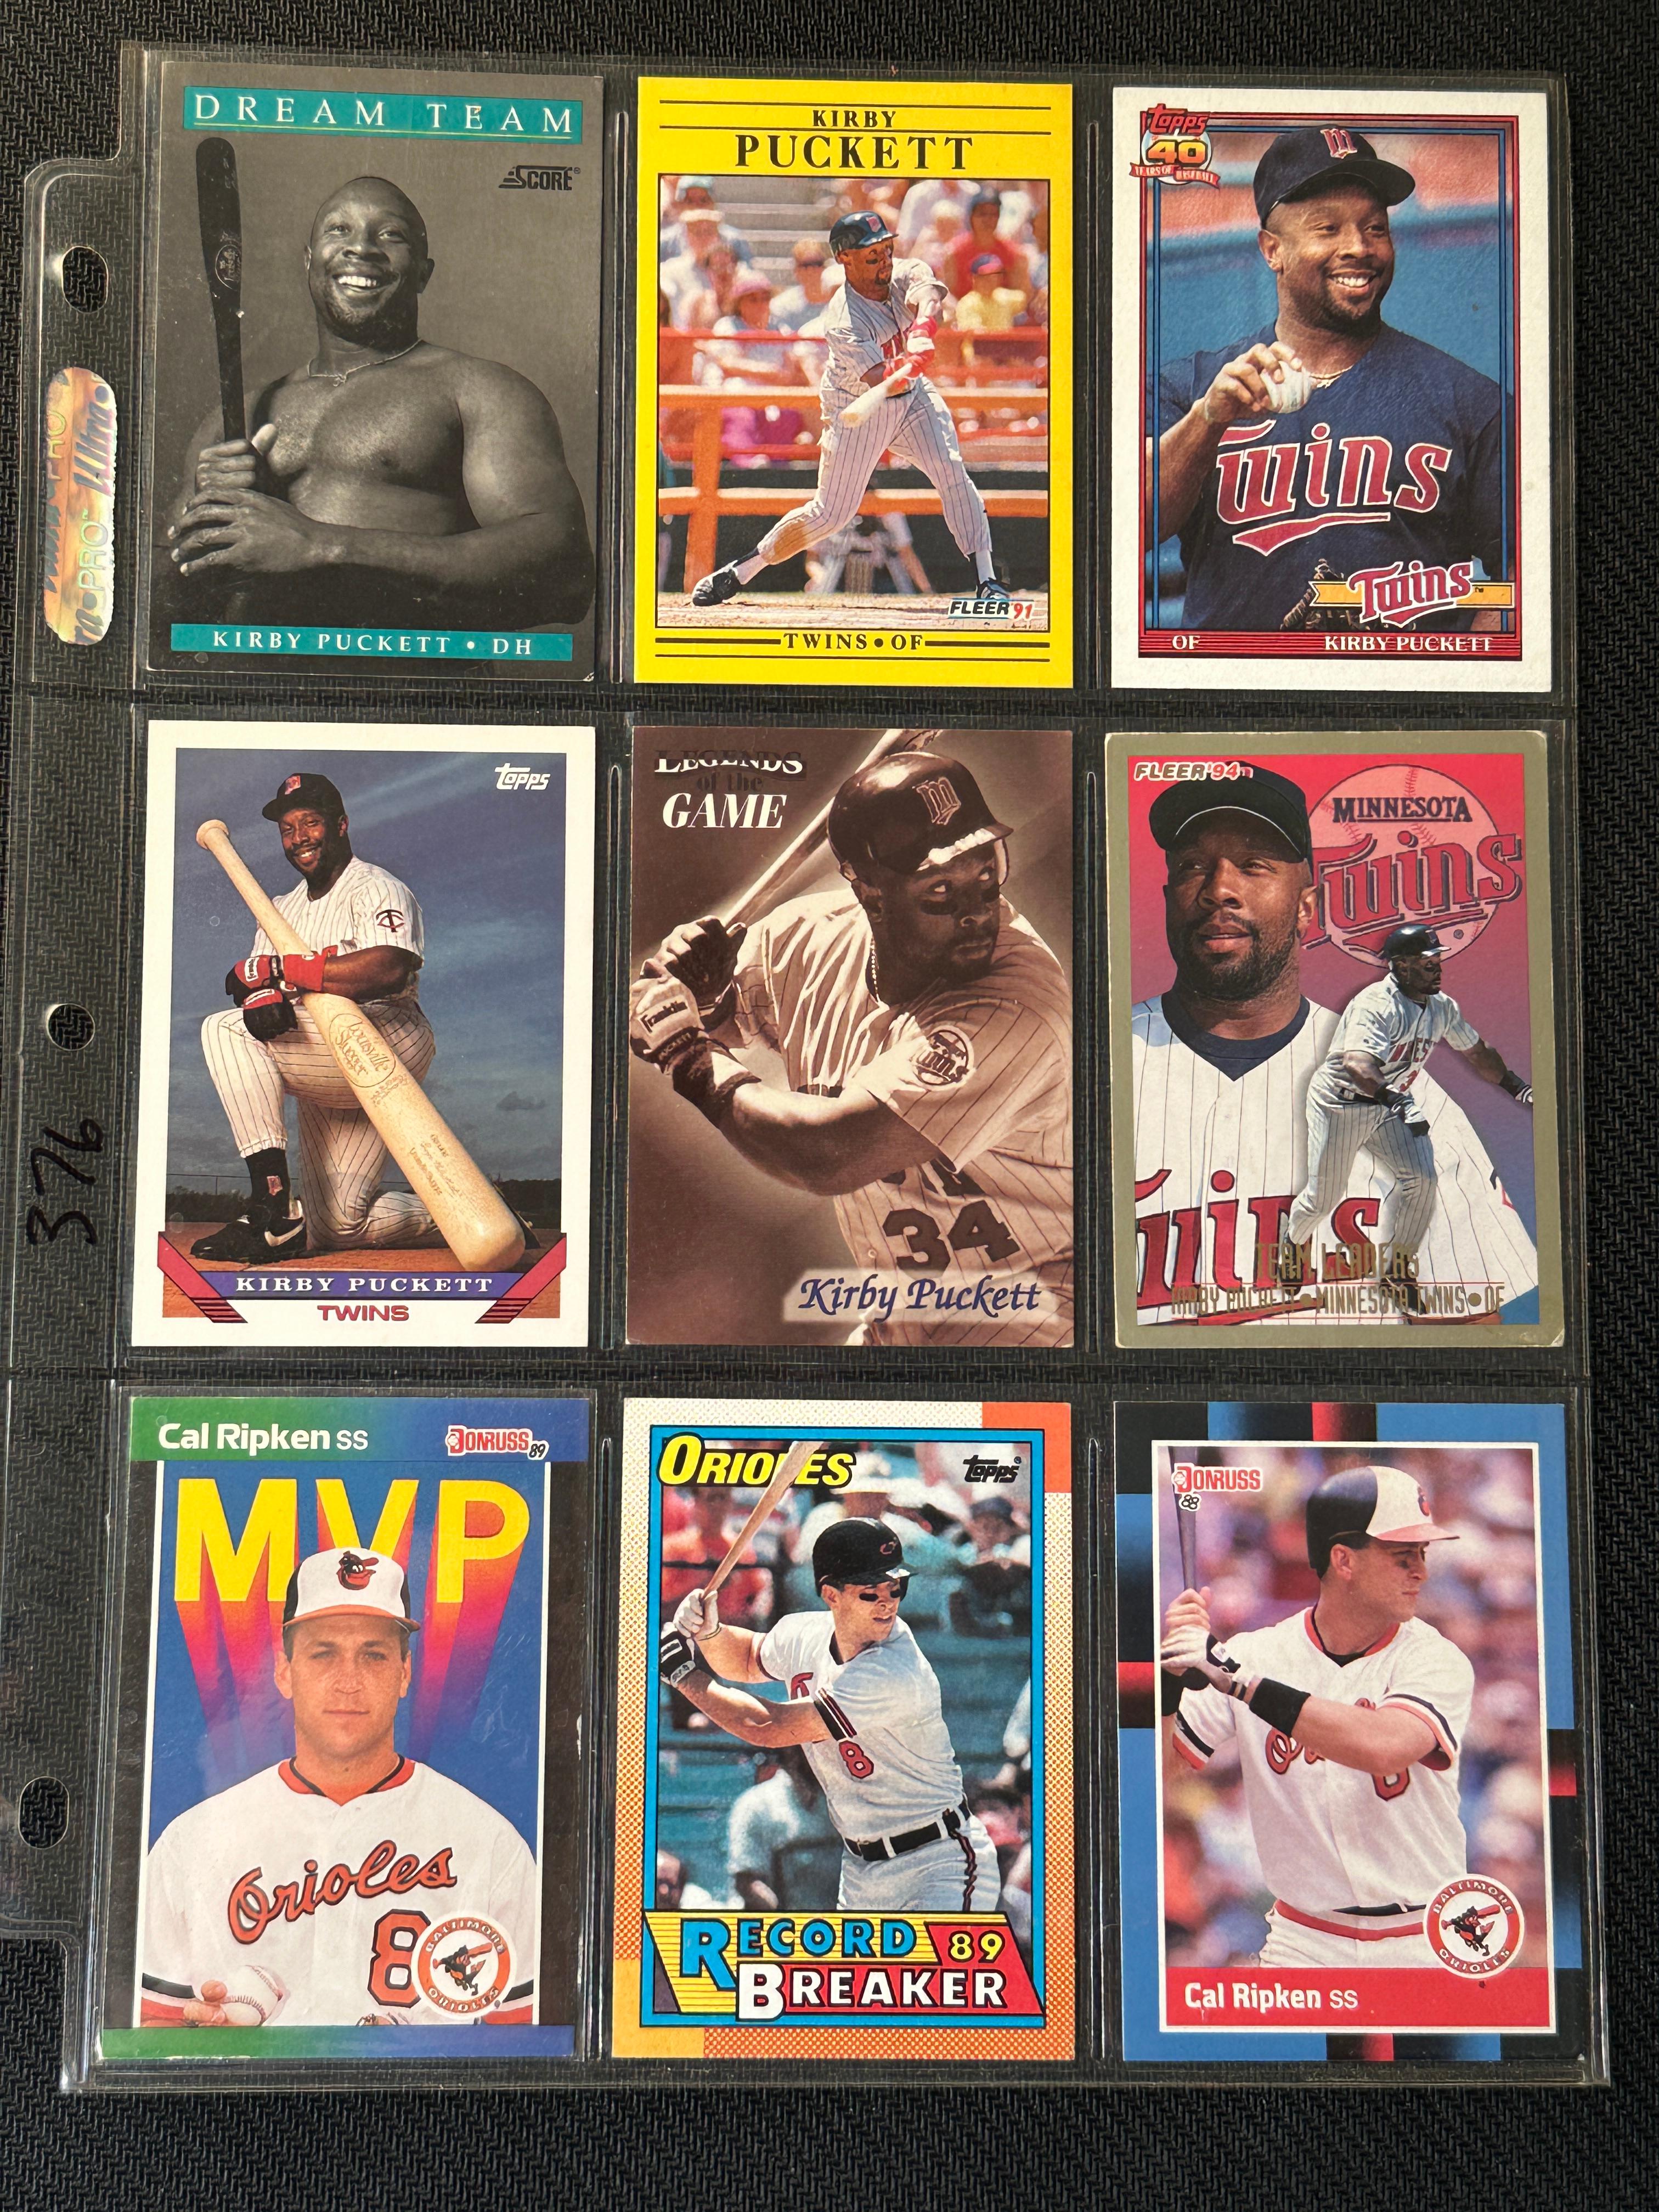 9 Card Baseball Lot in Pages - Different Players, years, conditions